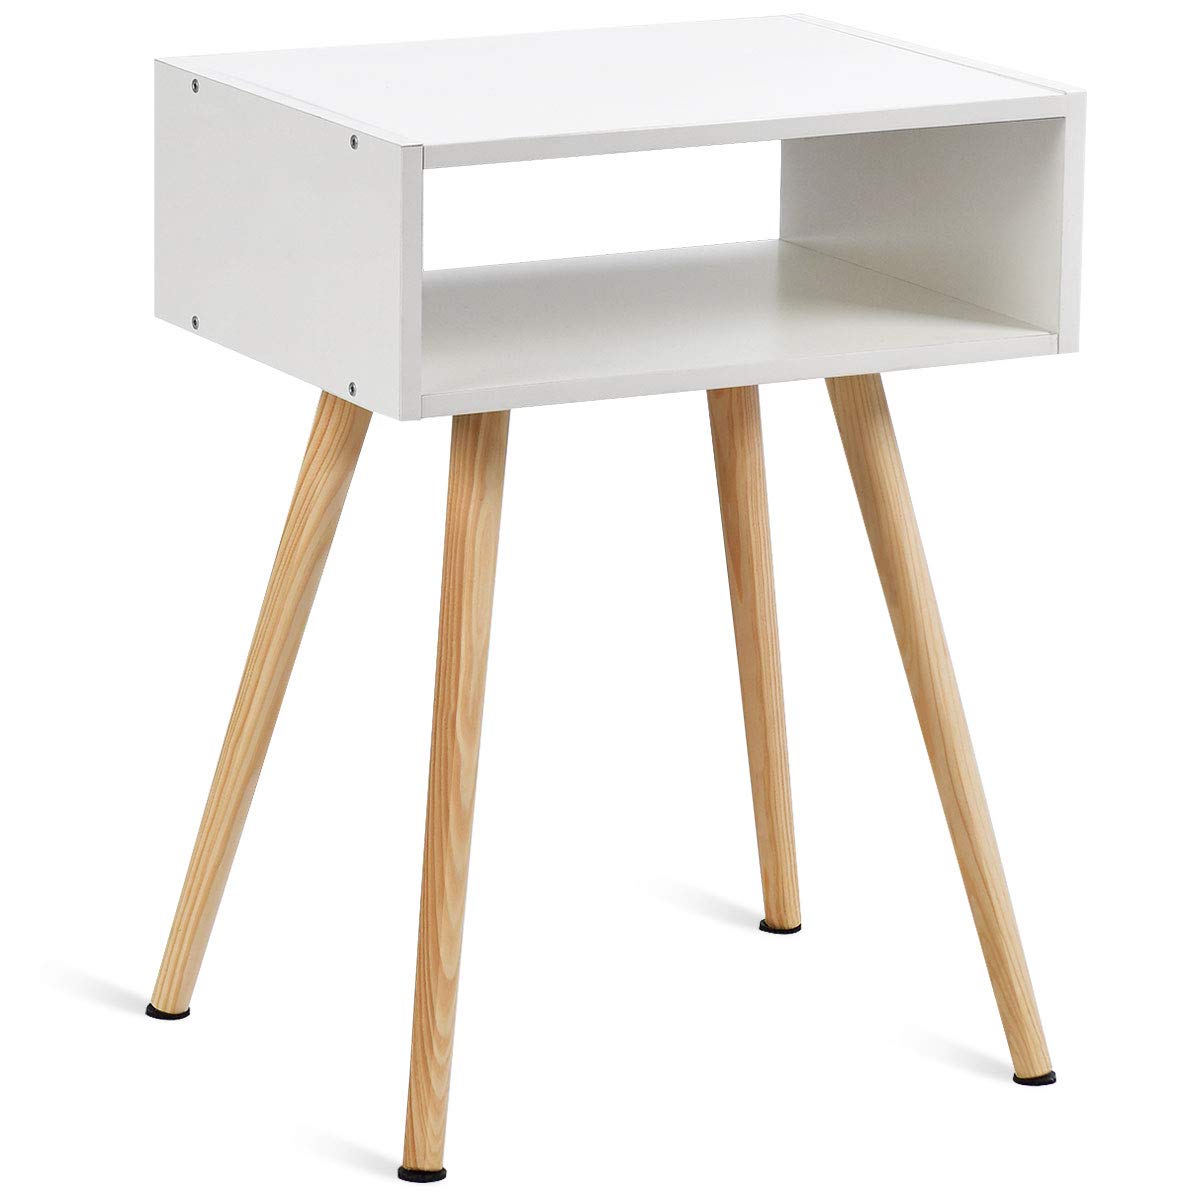 Bedside Table, Nightstand Unit w/ Smooth Surface & Solid Wood Legs, Open Storage Space